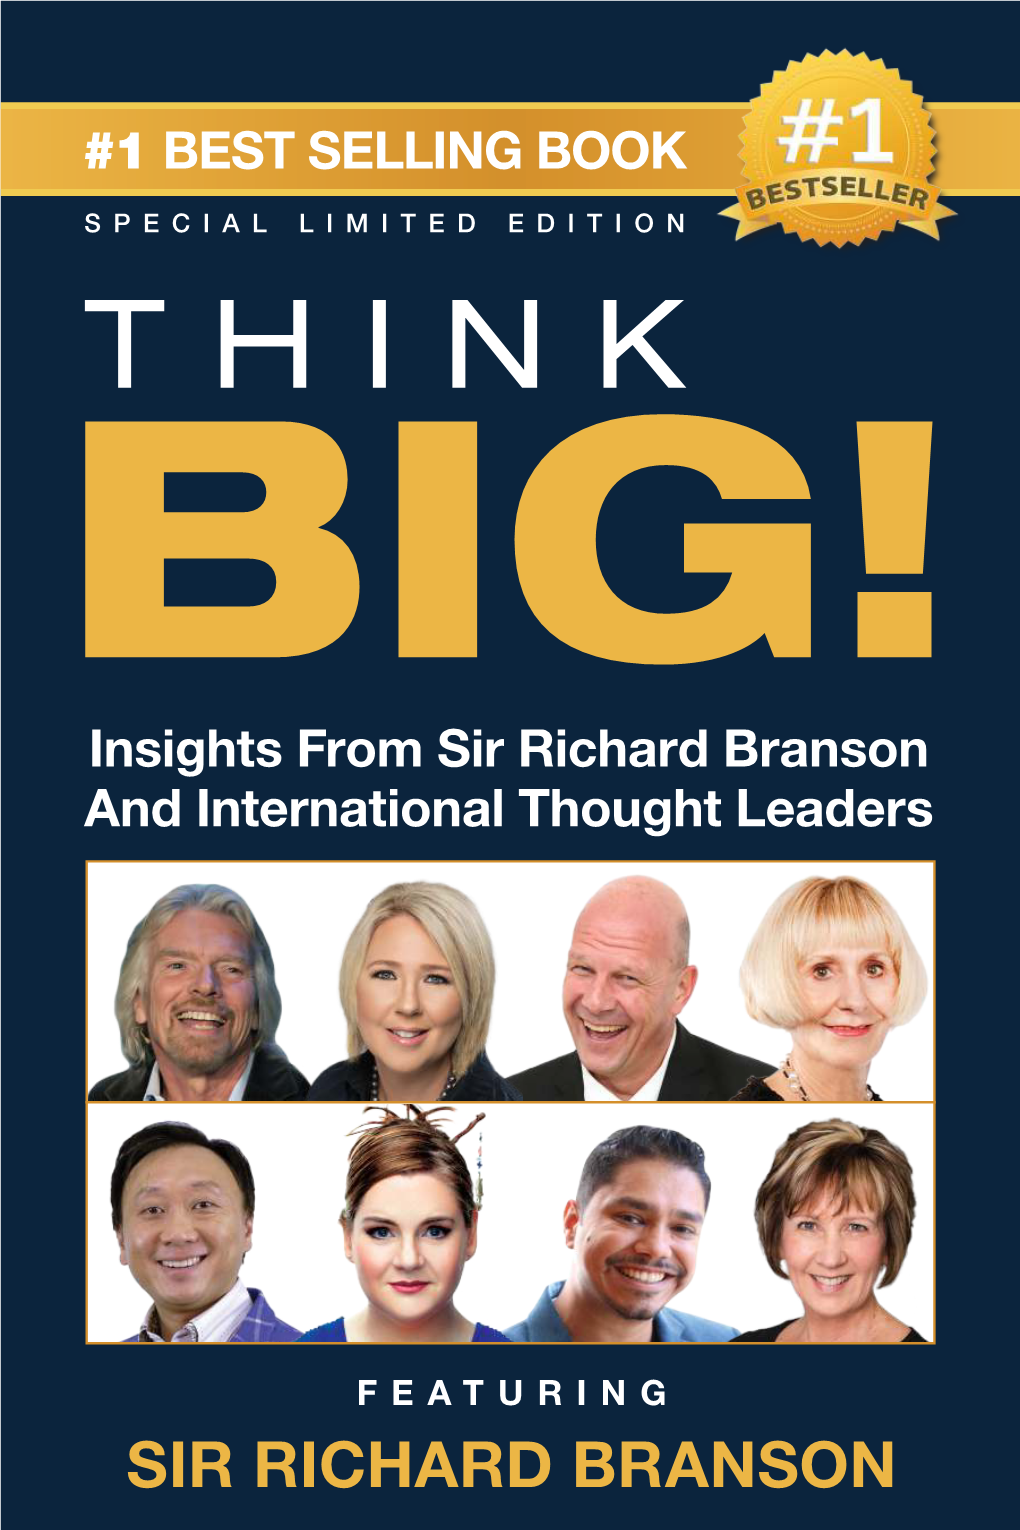 Sir Richard Branson and International Thought Leaders